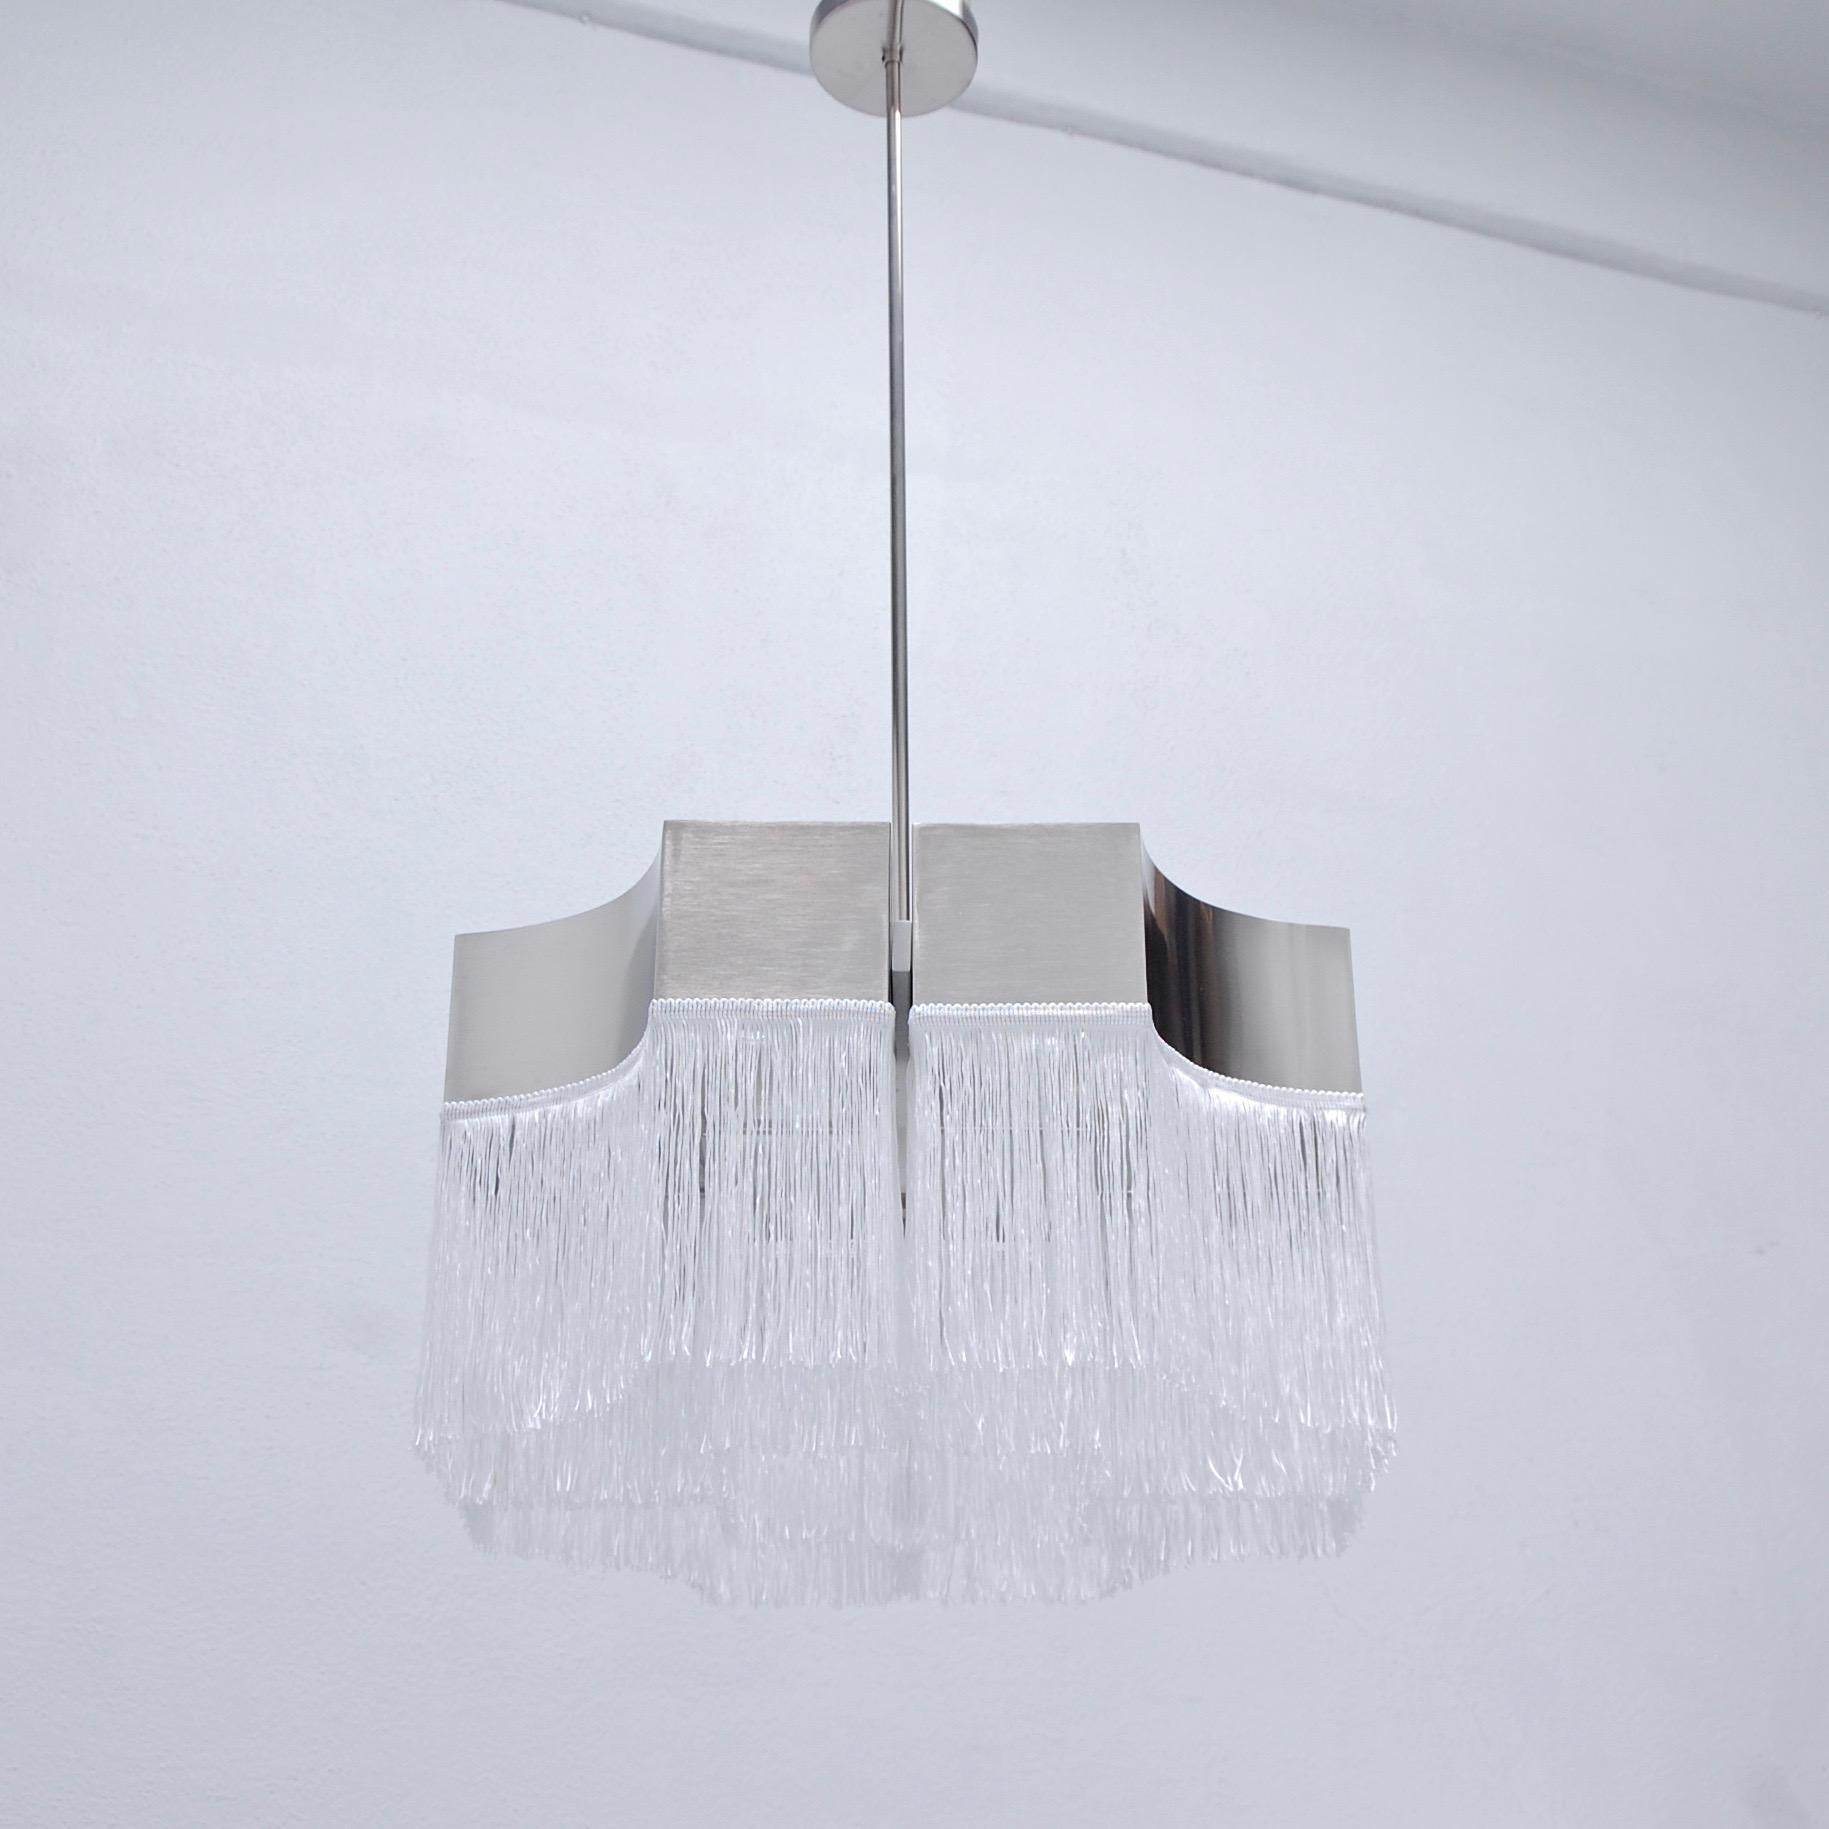 2 stunning 1960s chandelier attributed to Massimo Vignelli from Italy in nickel-plated steel and white fringe. With eight candelabra based E12 sockets. Max wattage per socket 25 watts rendering 200 watts total illumination. Currently rewired for use